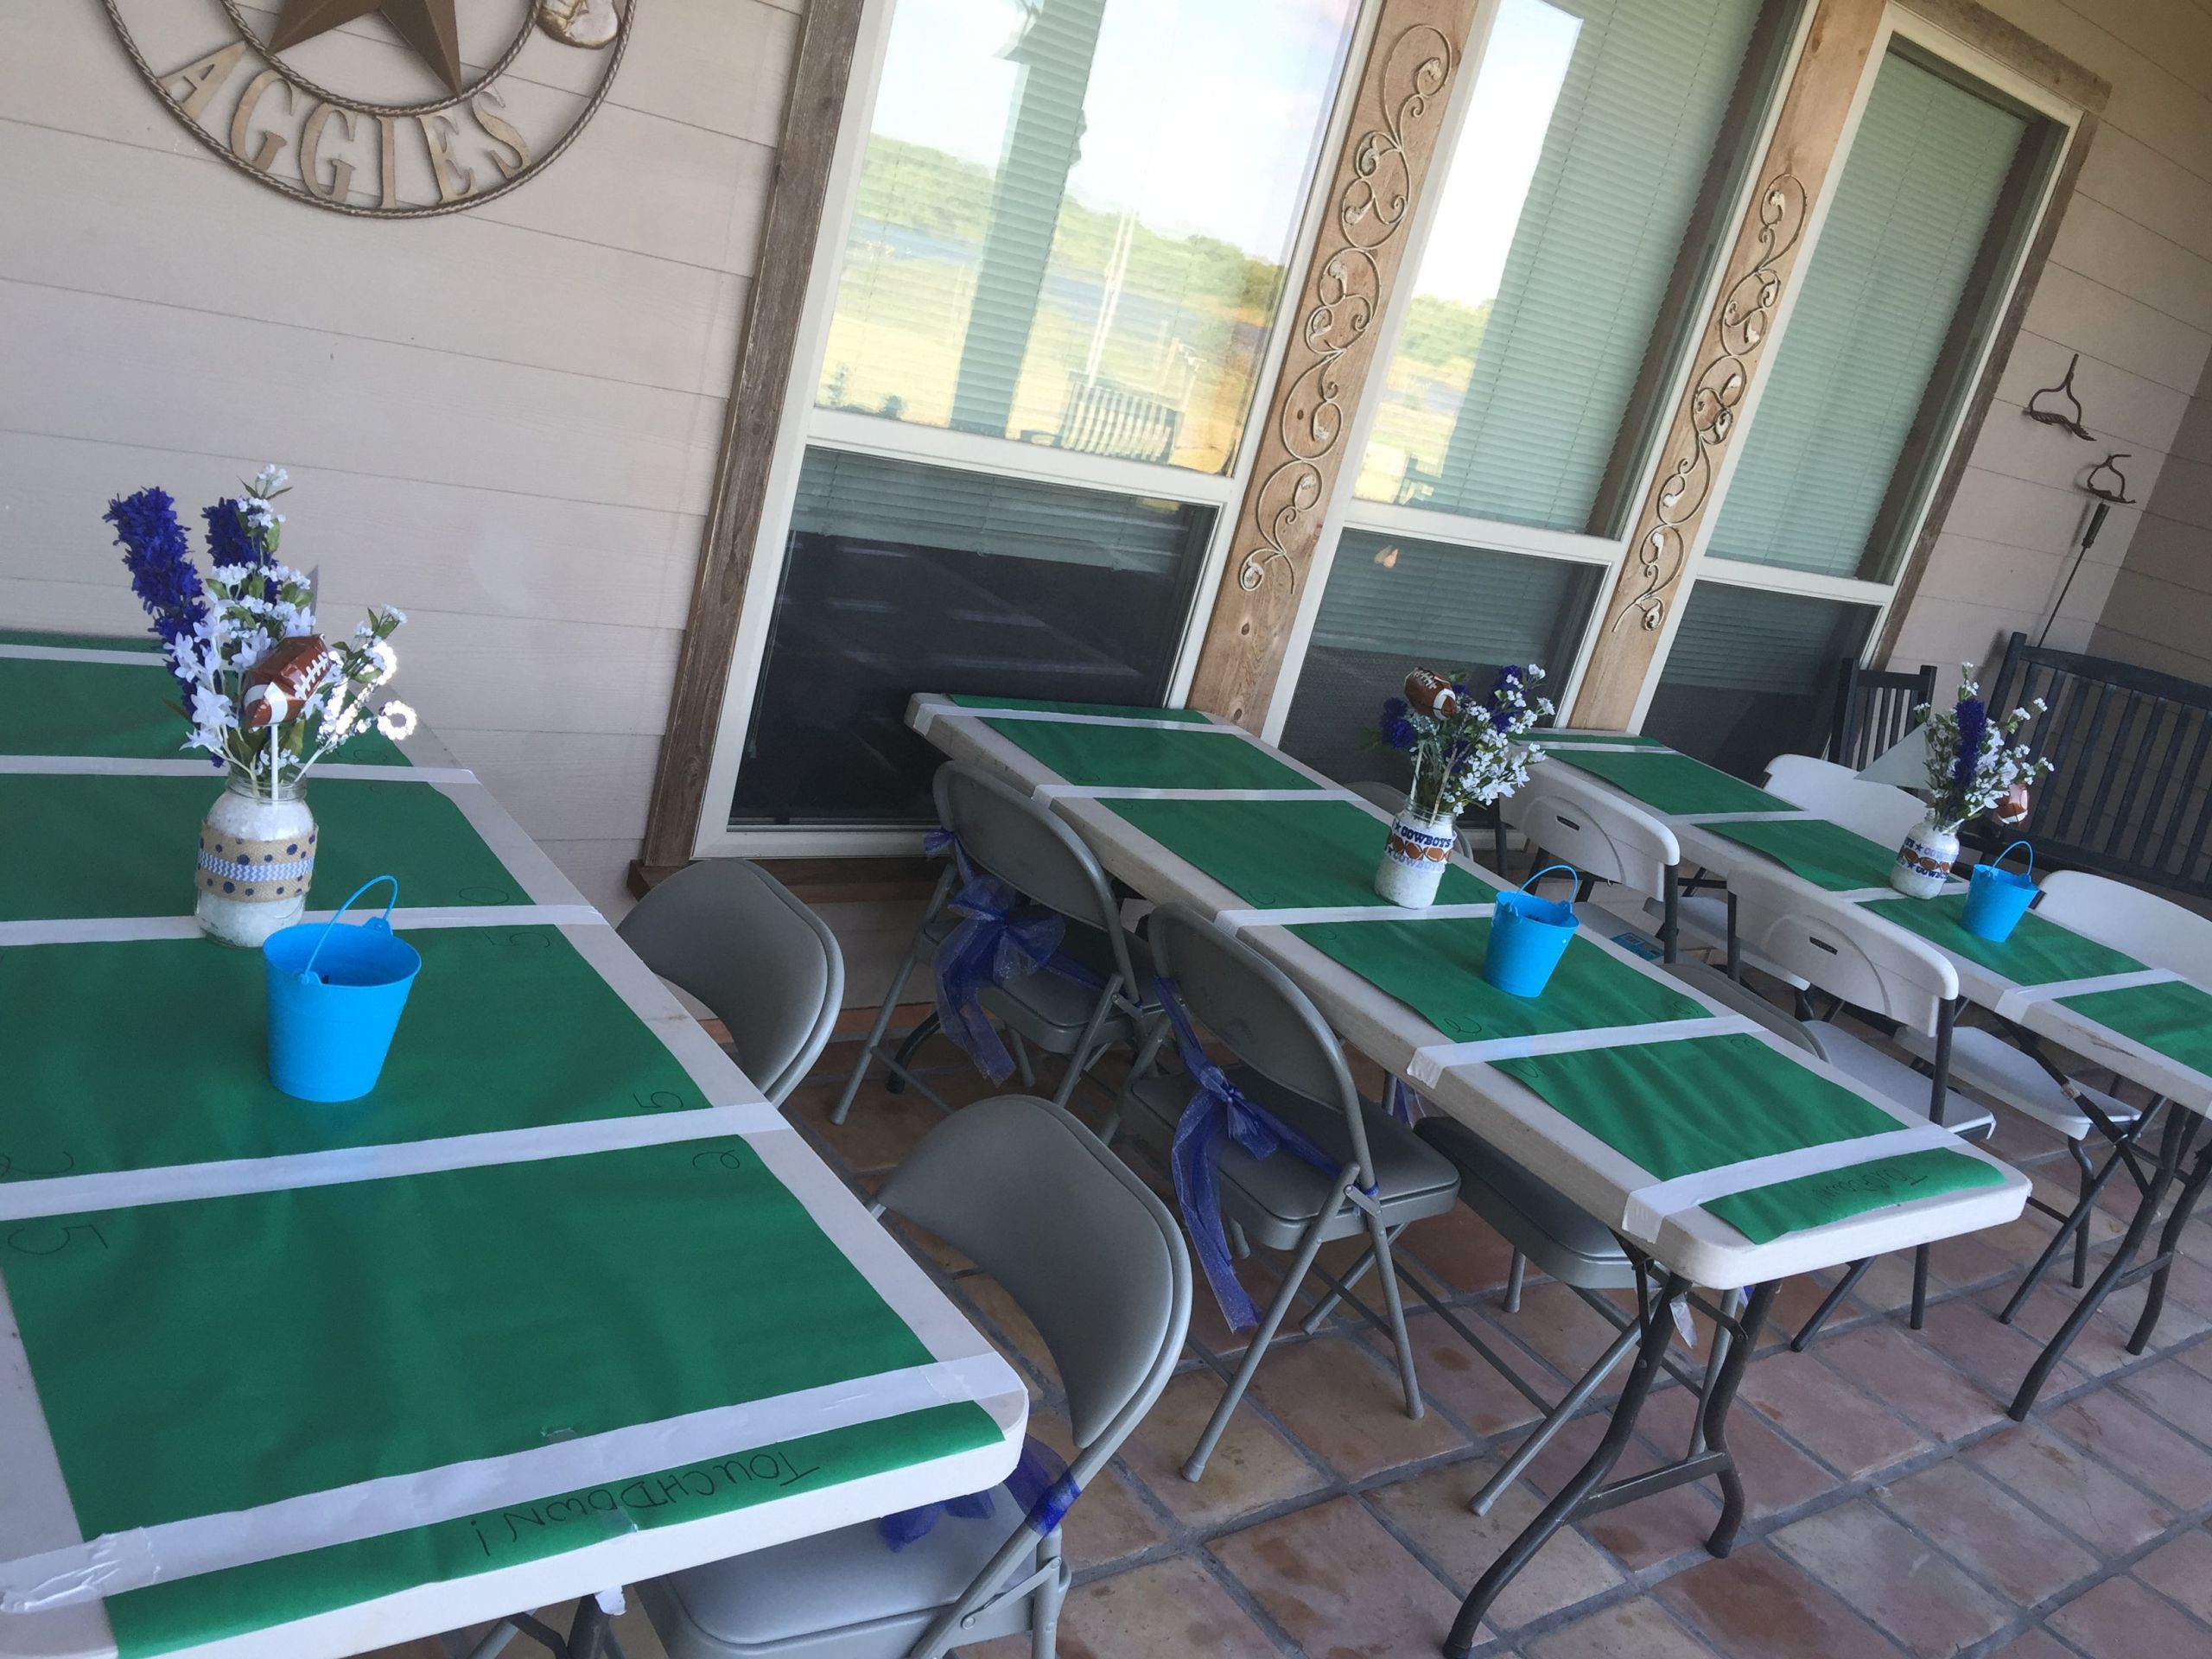 Dallas Cowboys Birthday Decorations
 Football tables for Dallas Cowboys baby shower with